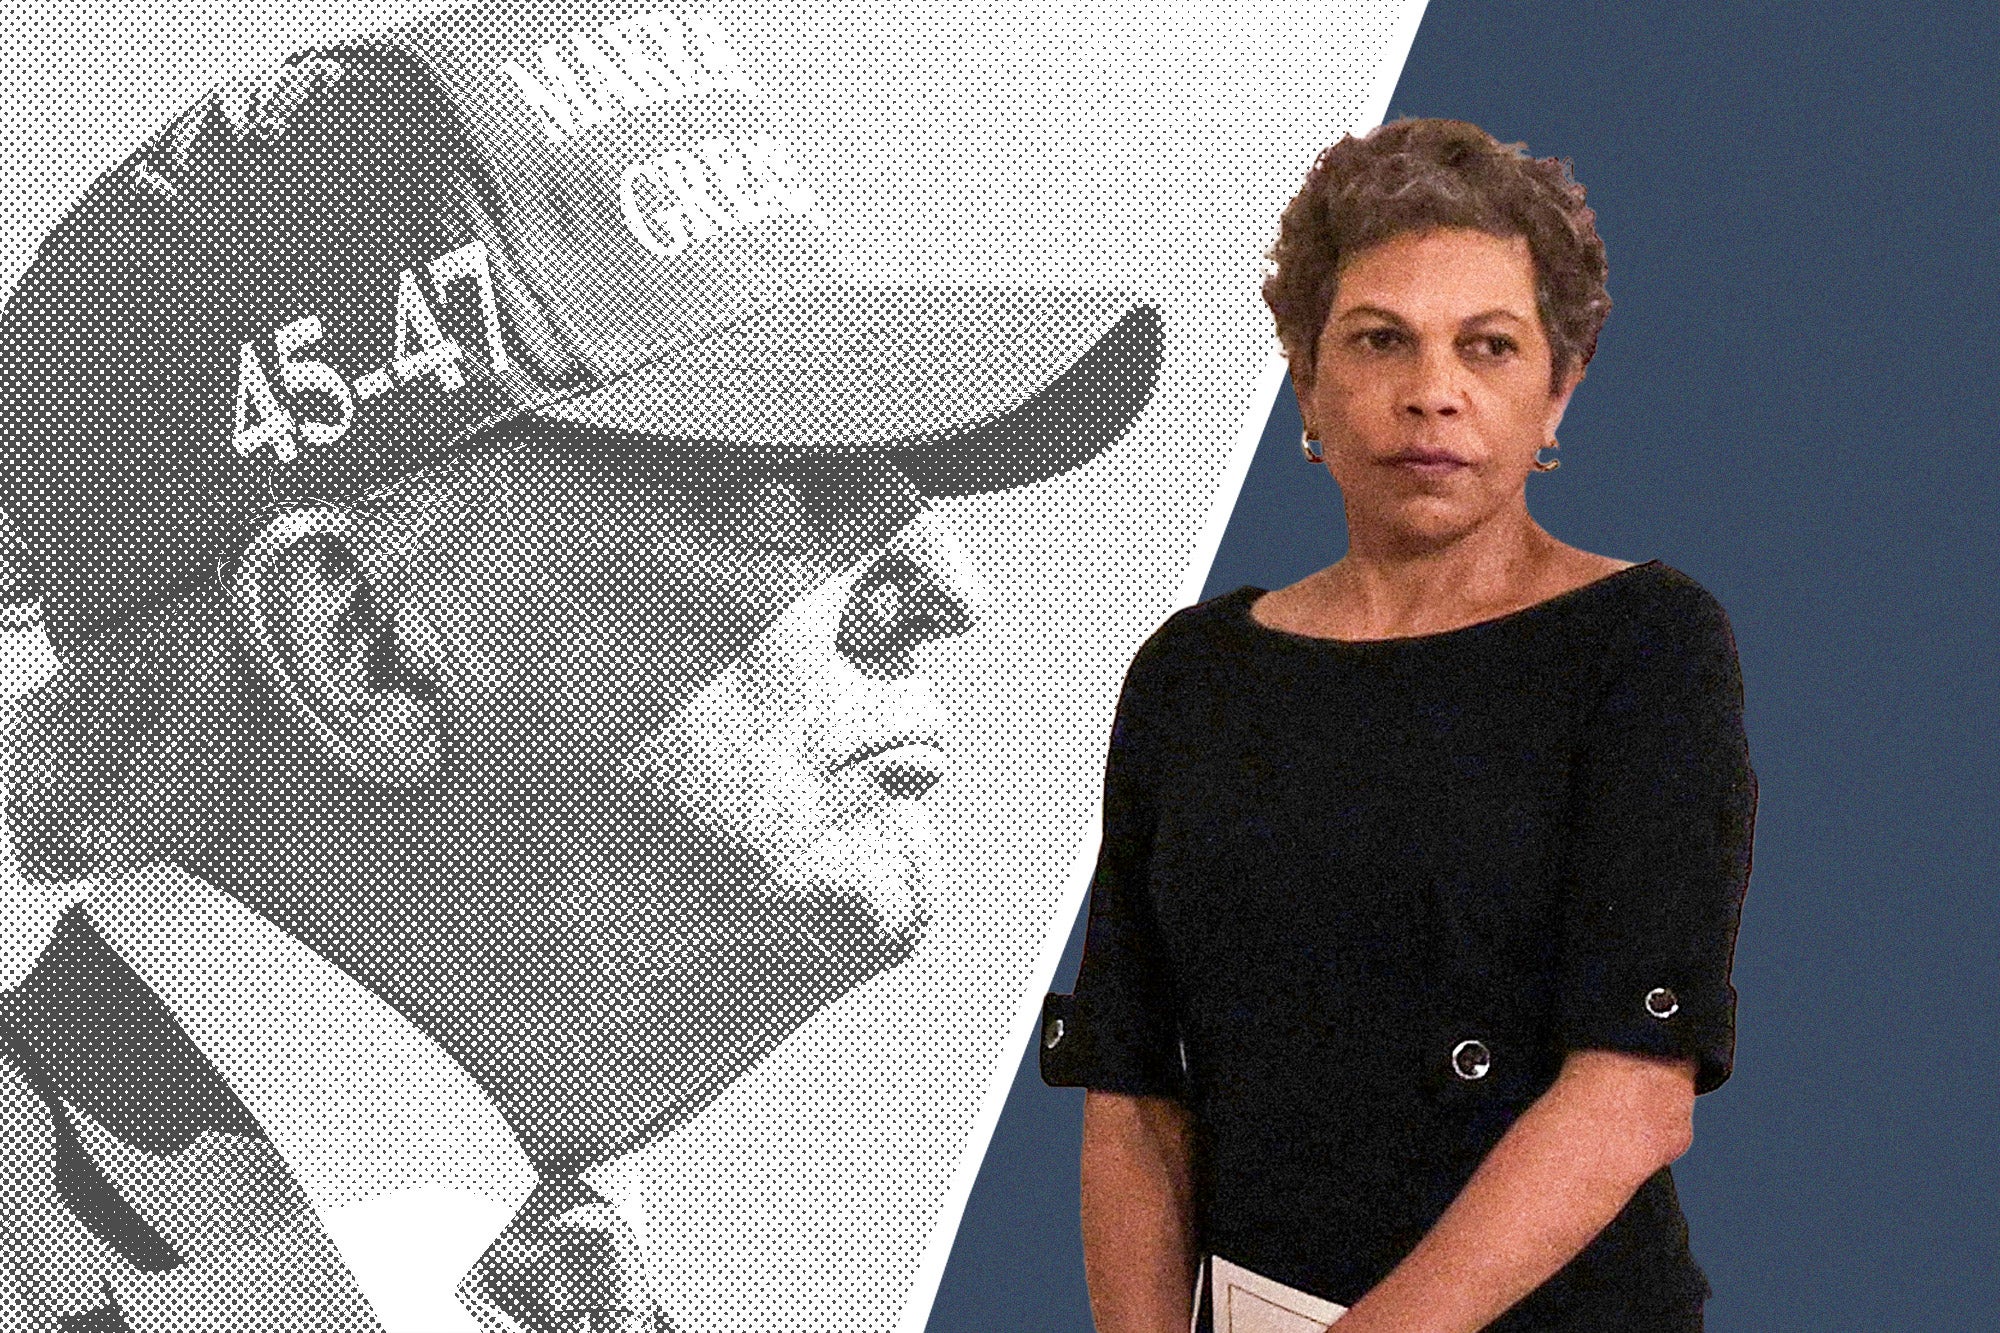 Side-by-side of a pixellated black-and-white Trump wearing a MAGA hat and Judge Tanya Chutkan, looking determined.